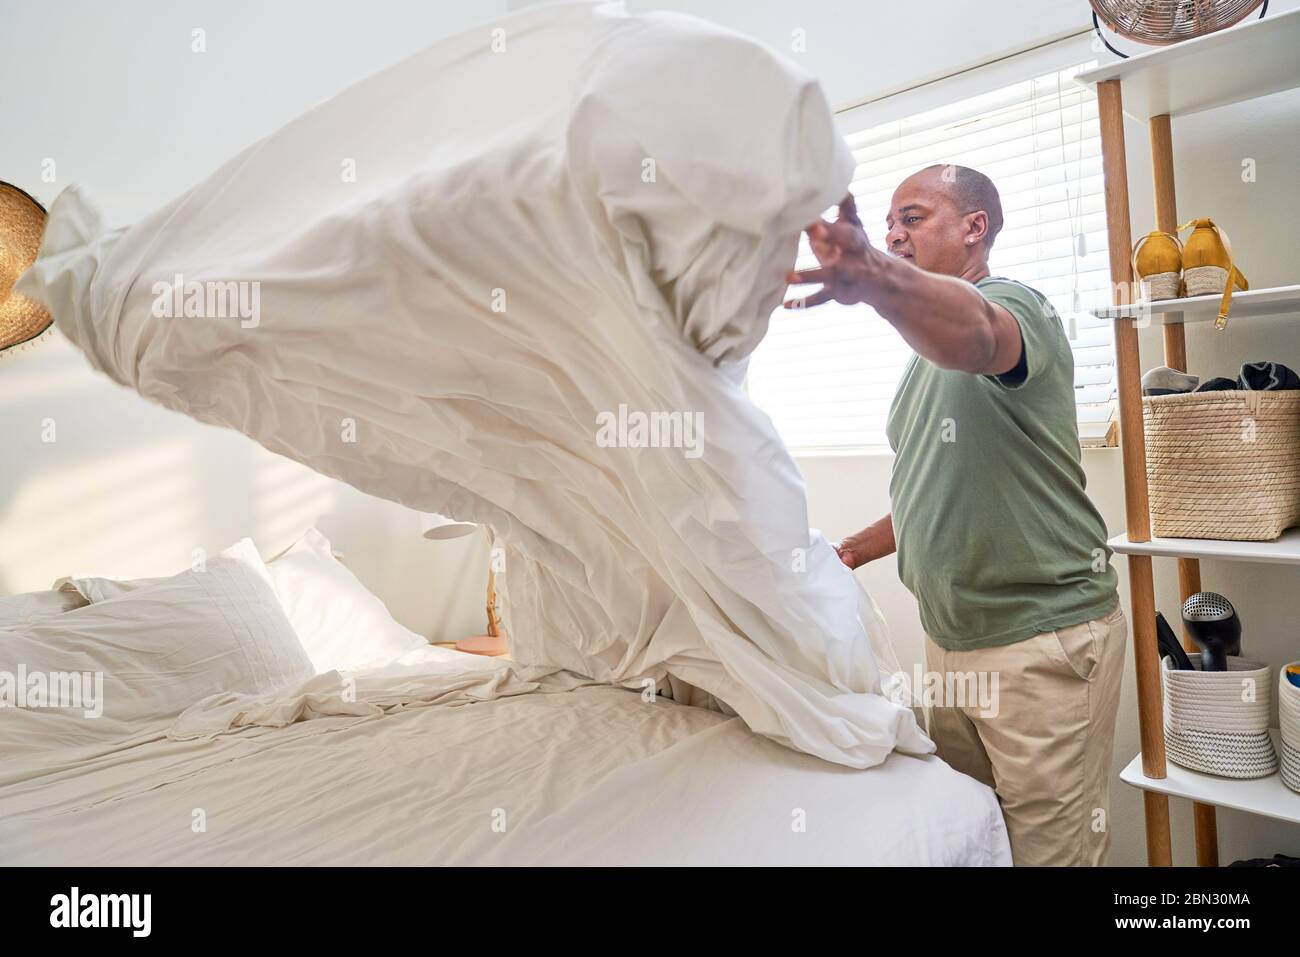 Man with duvet making bed in bedroom Stock Photo